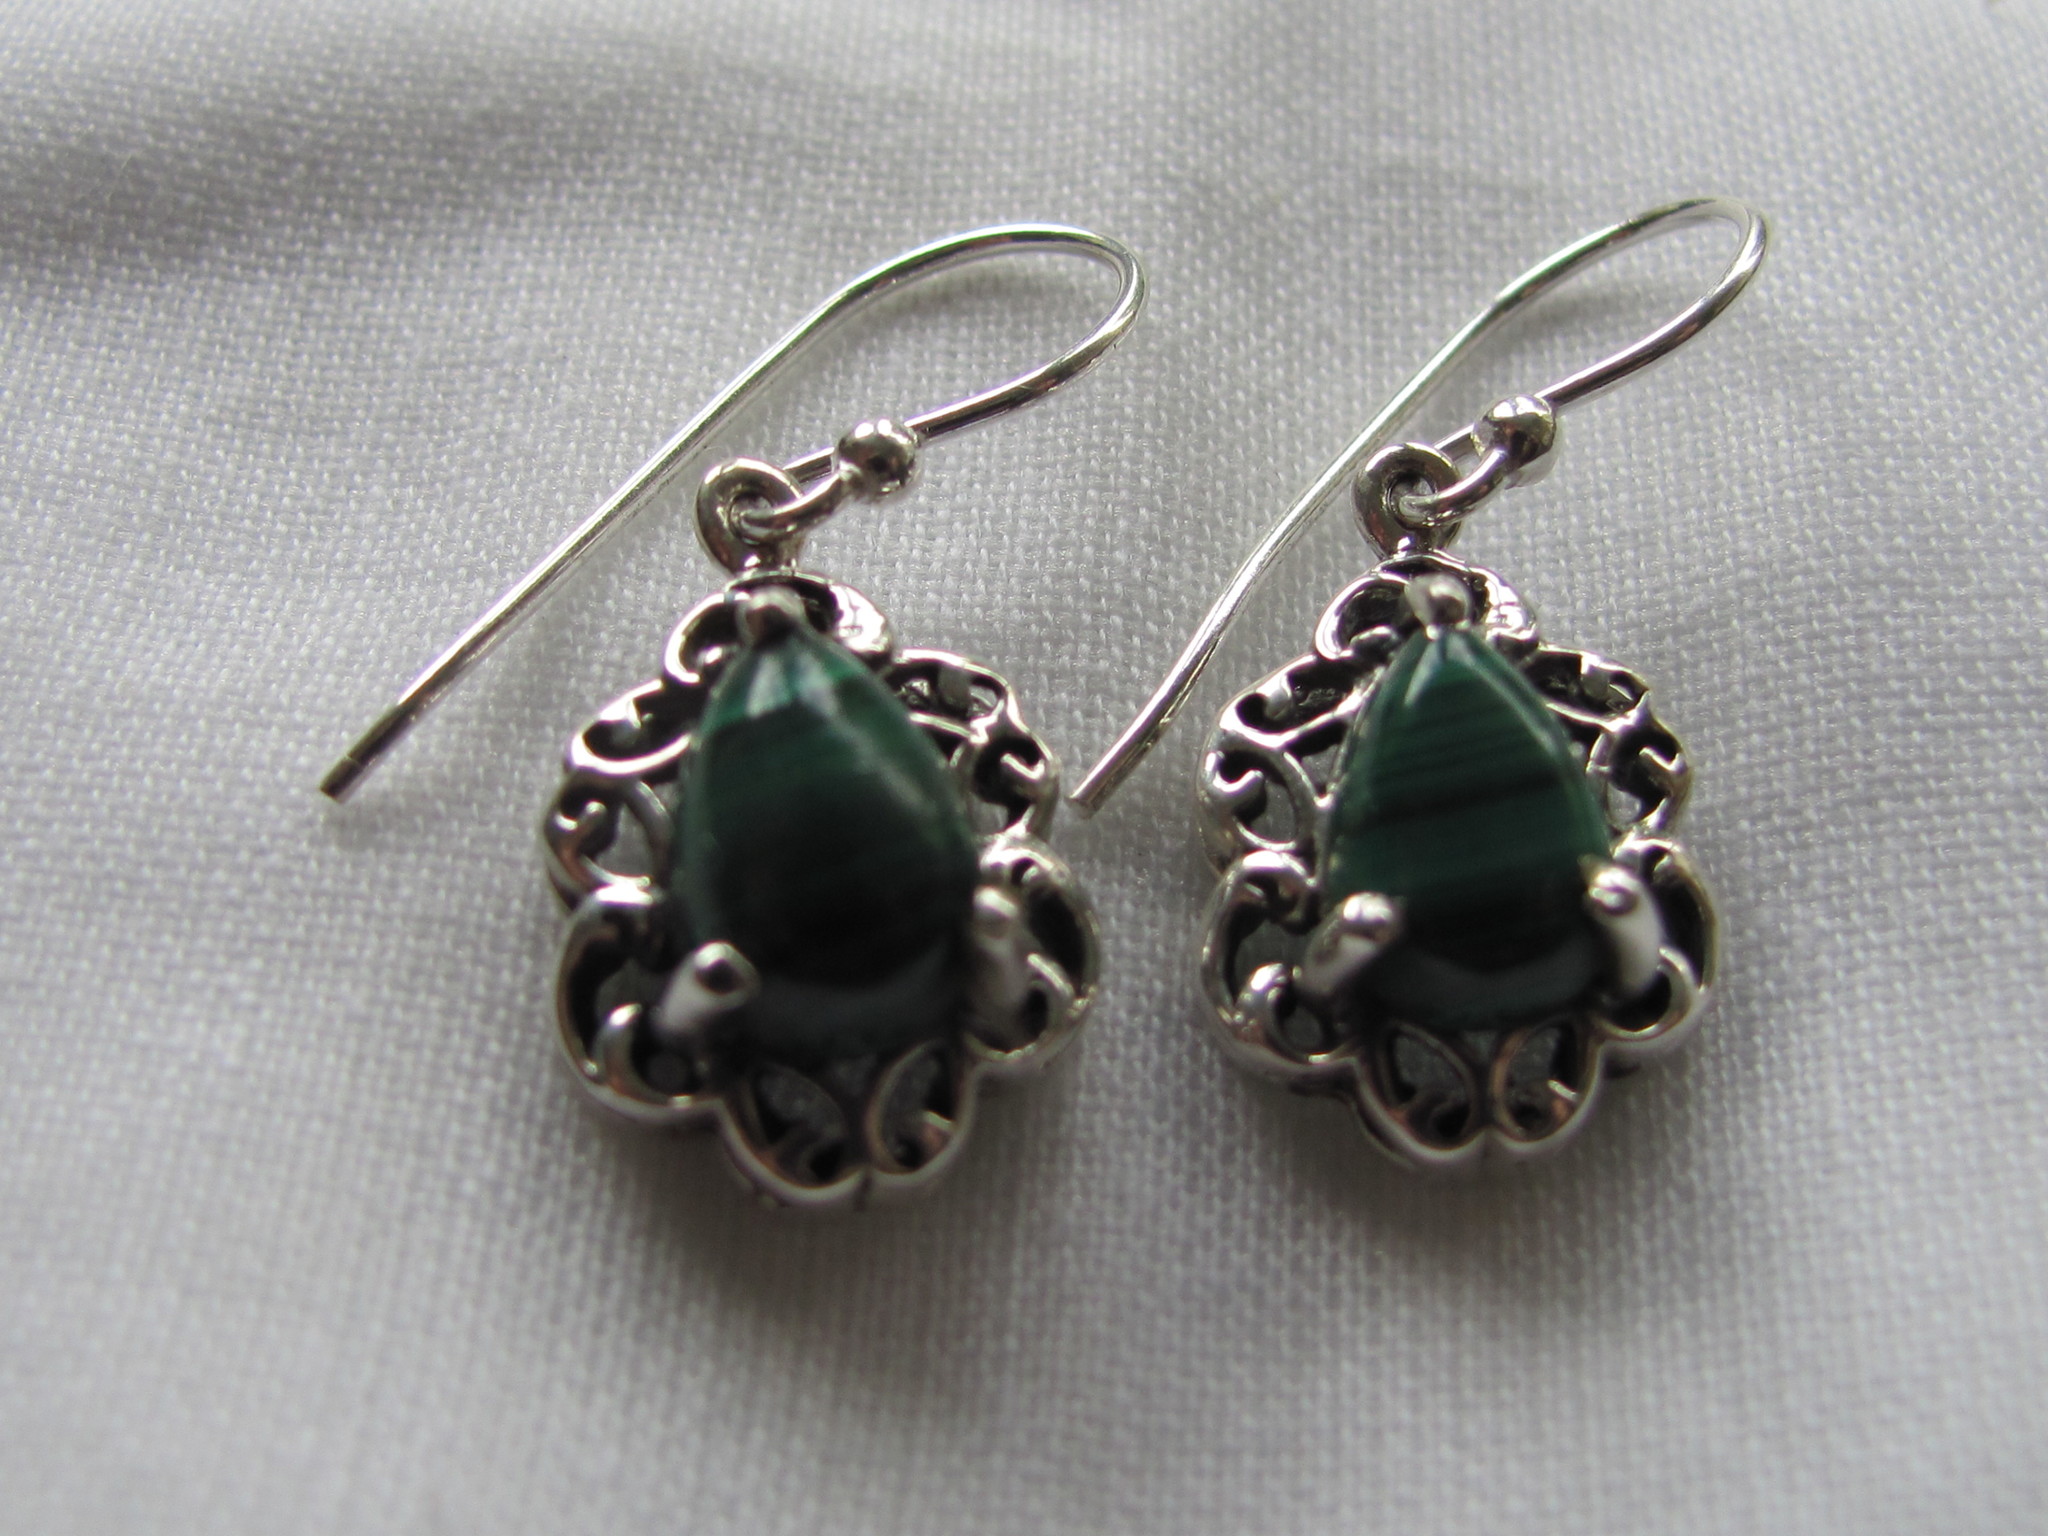 Earring silver  with  malachite stone